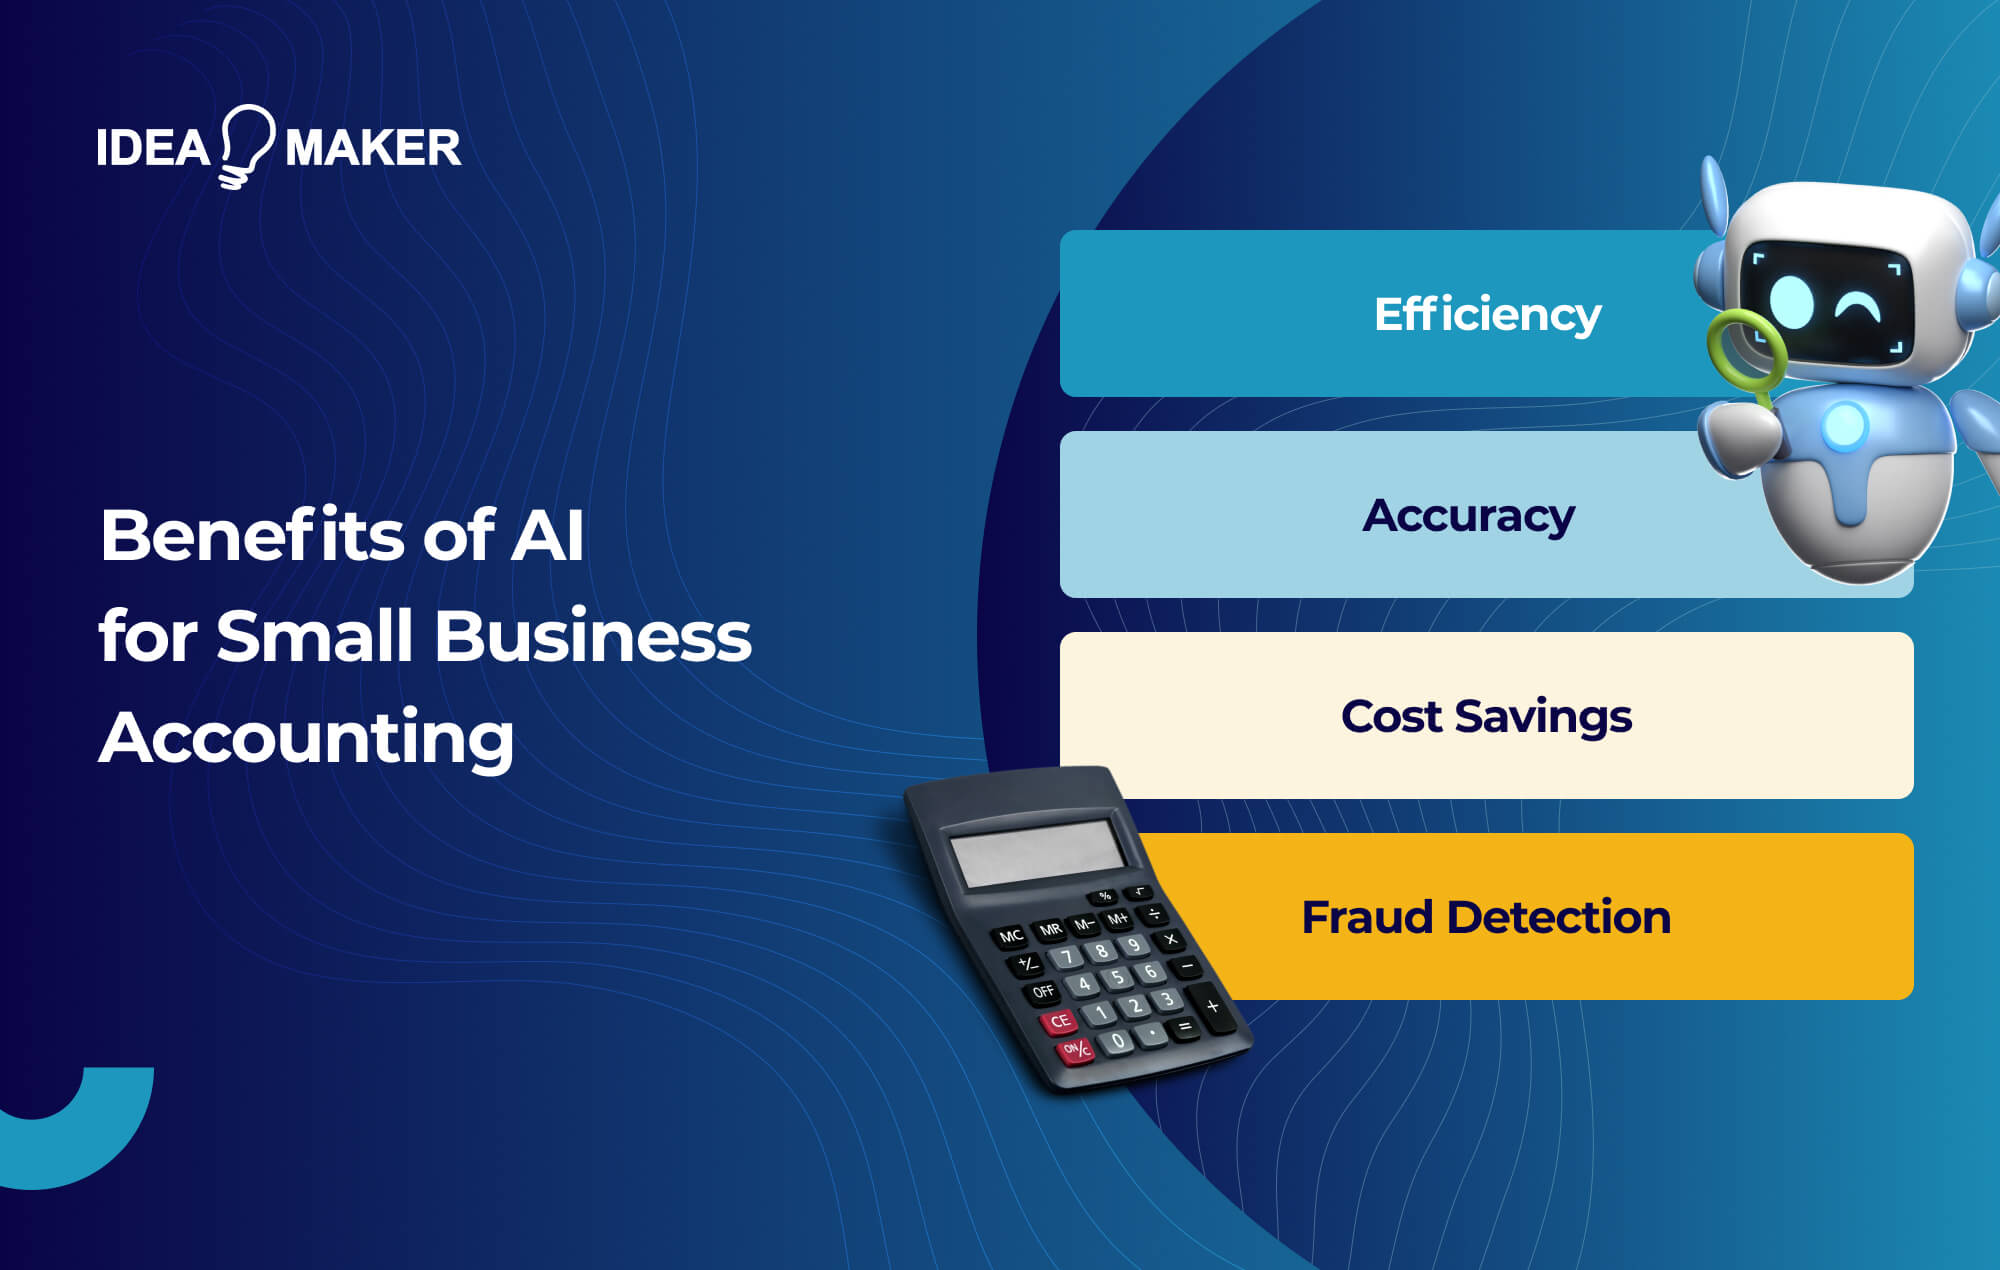 Ideamaker -Benefits of AI for Small Business Accounting